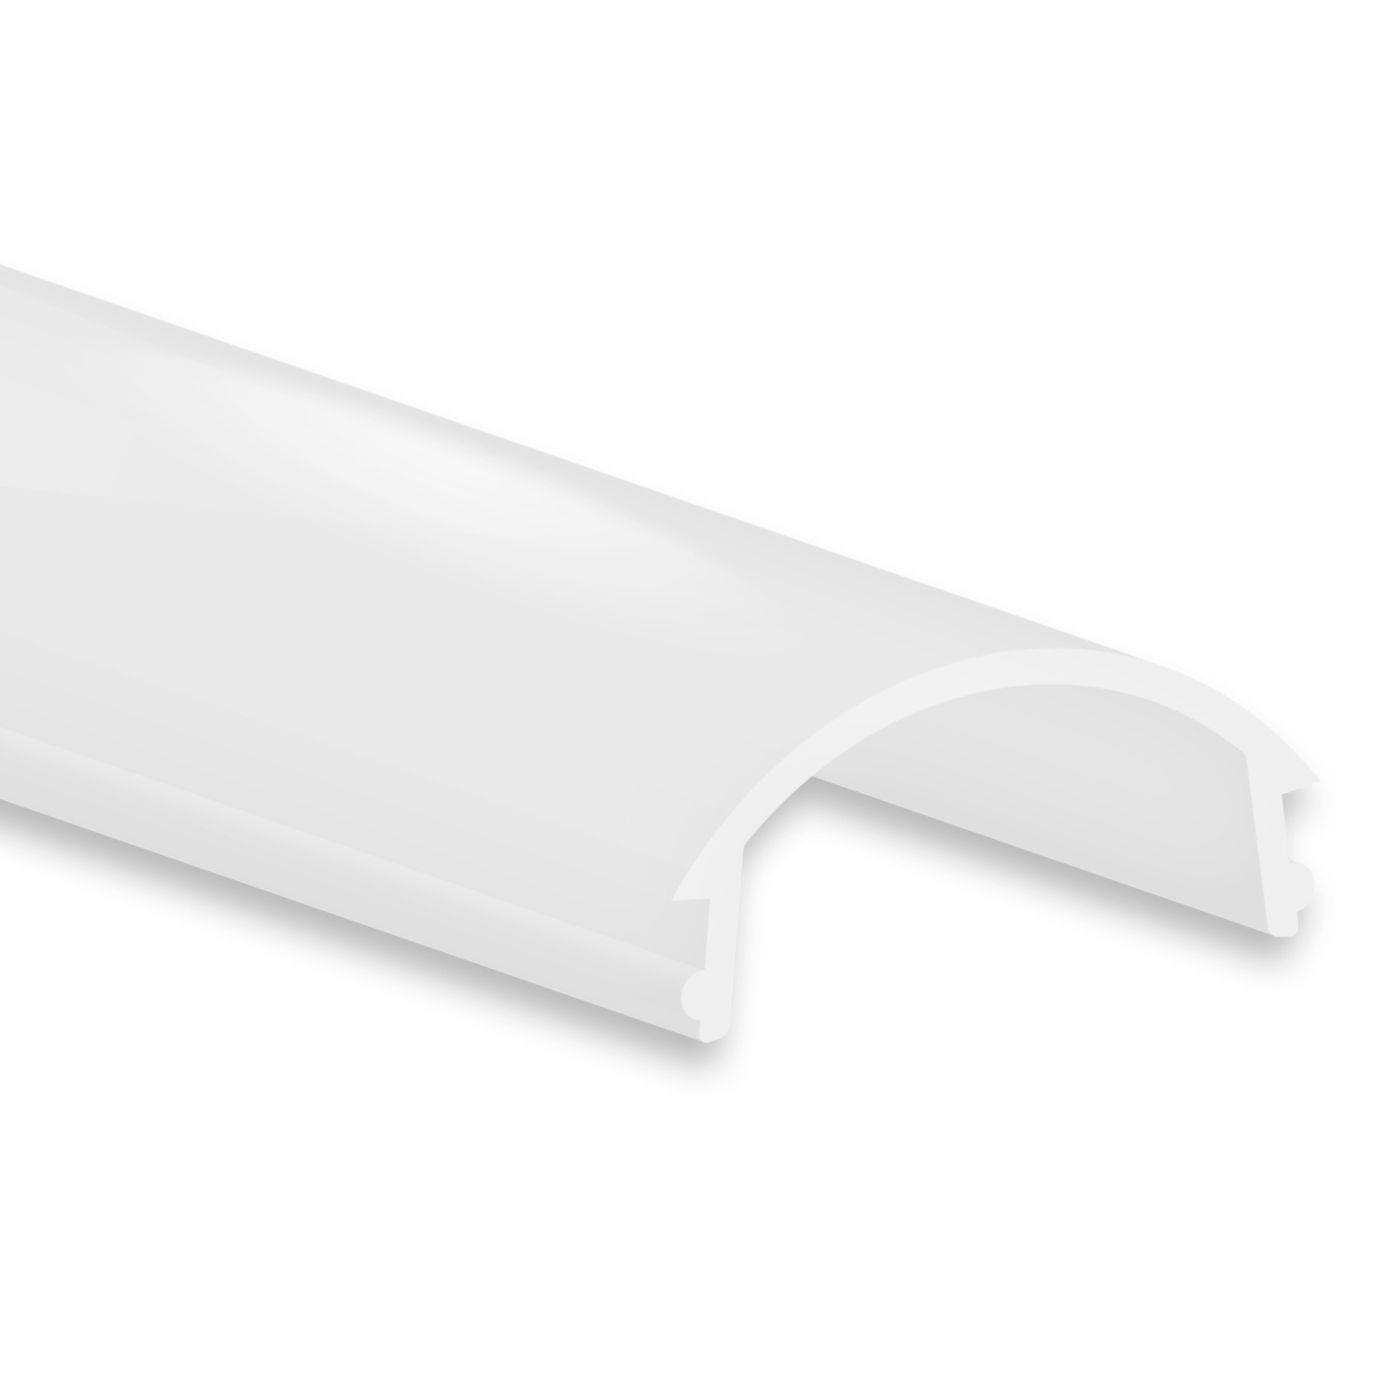 2m Cover C39 for people profile TWIN PL12 17,4x7,7mm Plastic